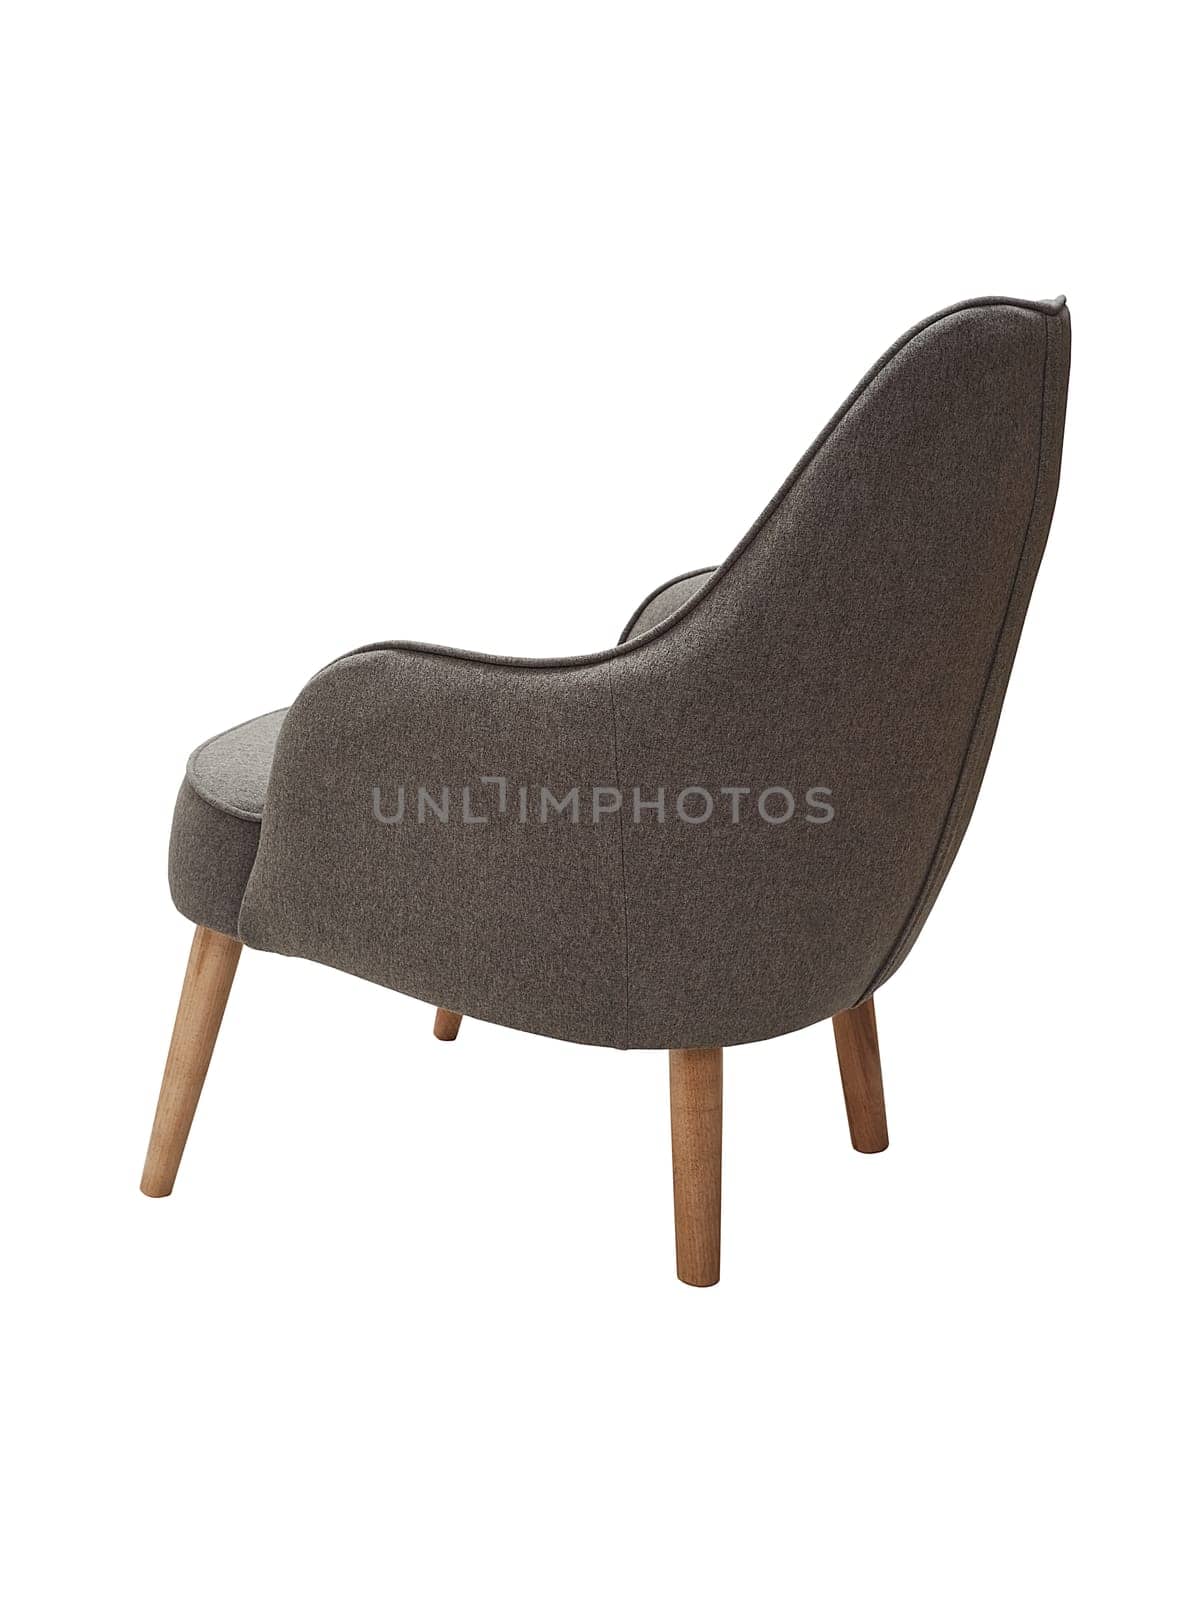 modern fabric gray armchair with wooden legs isolated on white background, back view by artemzatsepilin